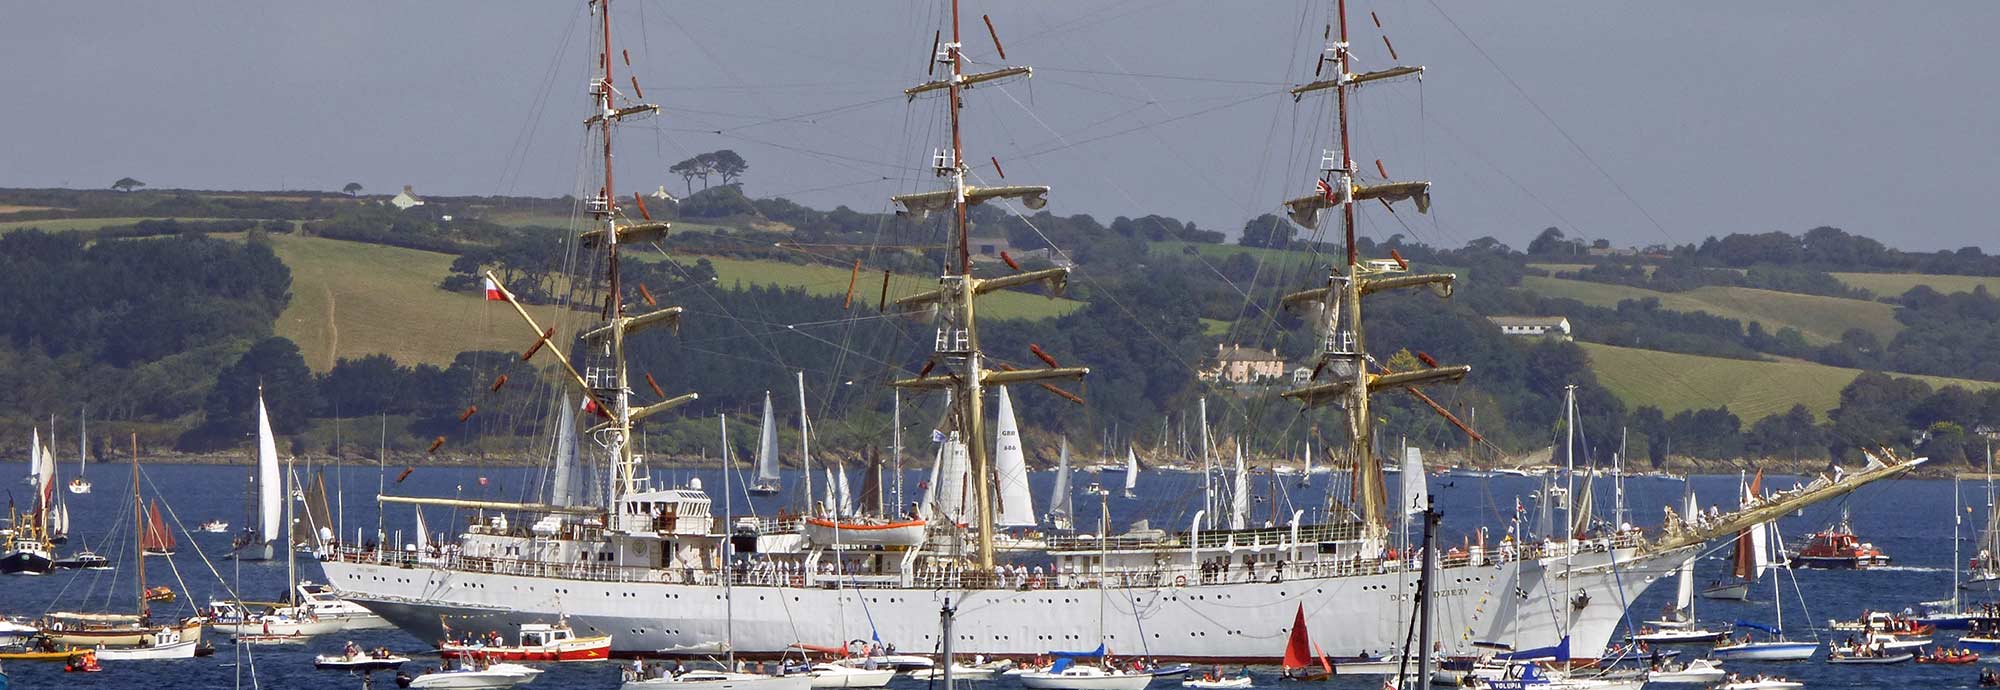 A photo of the Polish Tall Ship Dar Mlodziezy in Falmouth Bay as part of 2014's Parade of Sail. The large white ship is surrounded by smaller sailing vessels. The shot frames Dar Mlodziezy on the water in the centre, with rolling green hills in the background.